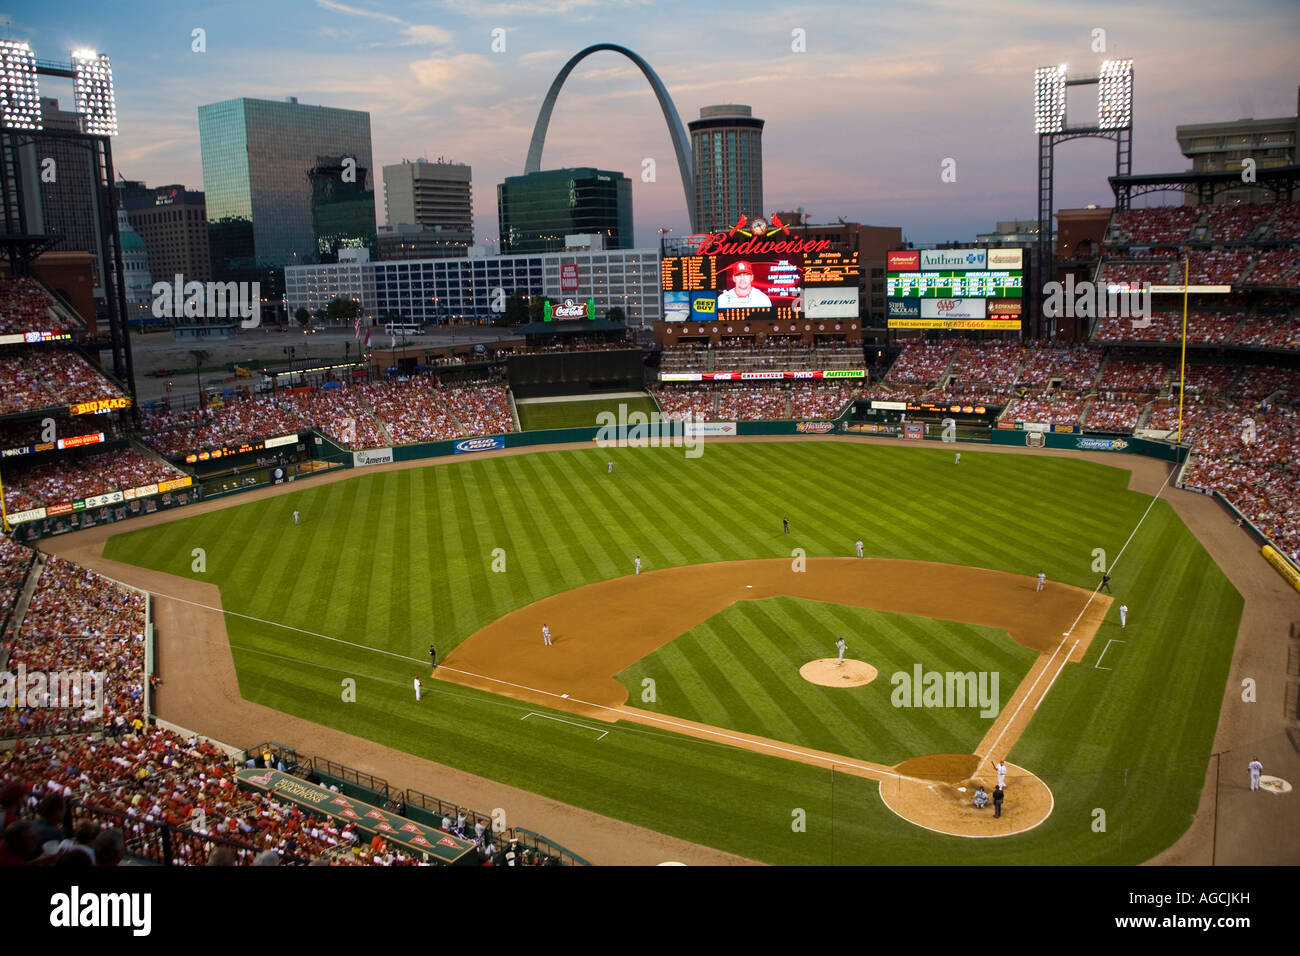 New Busch Stadium at night in downtown St Louis, MO, Saint Louis Stock Photo: 14168452 - Alamy